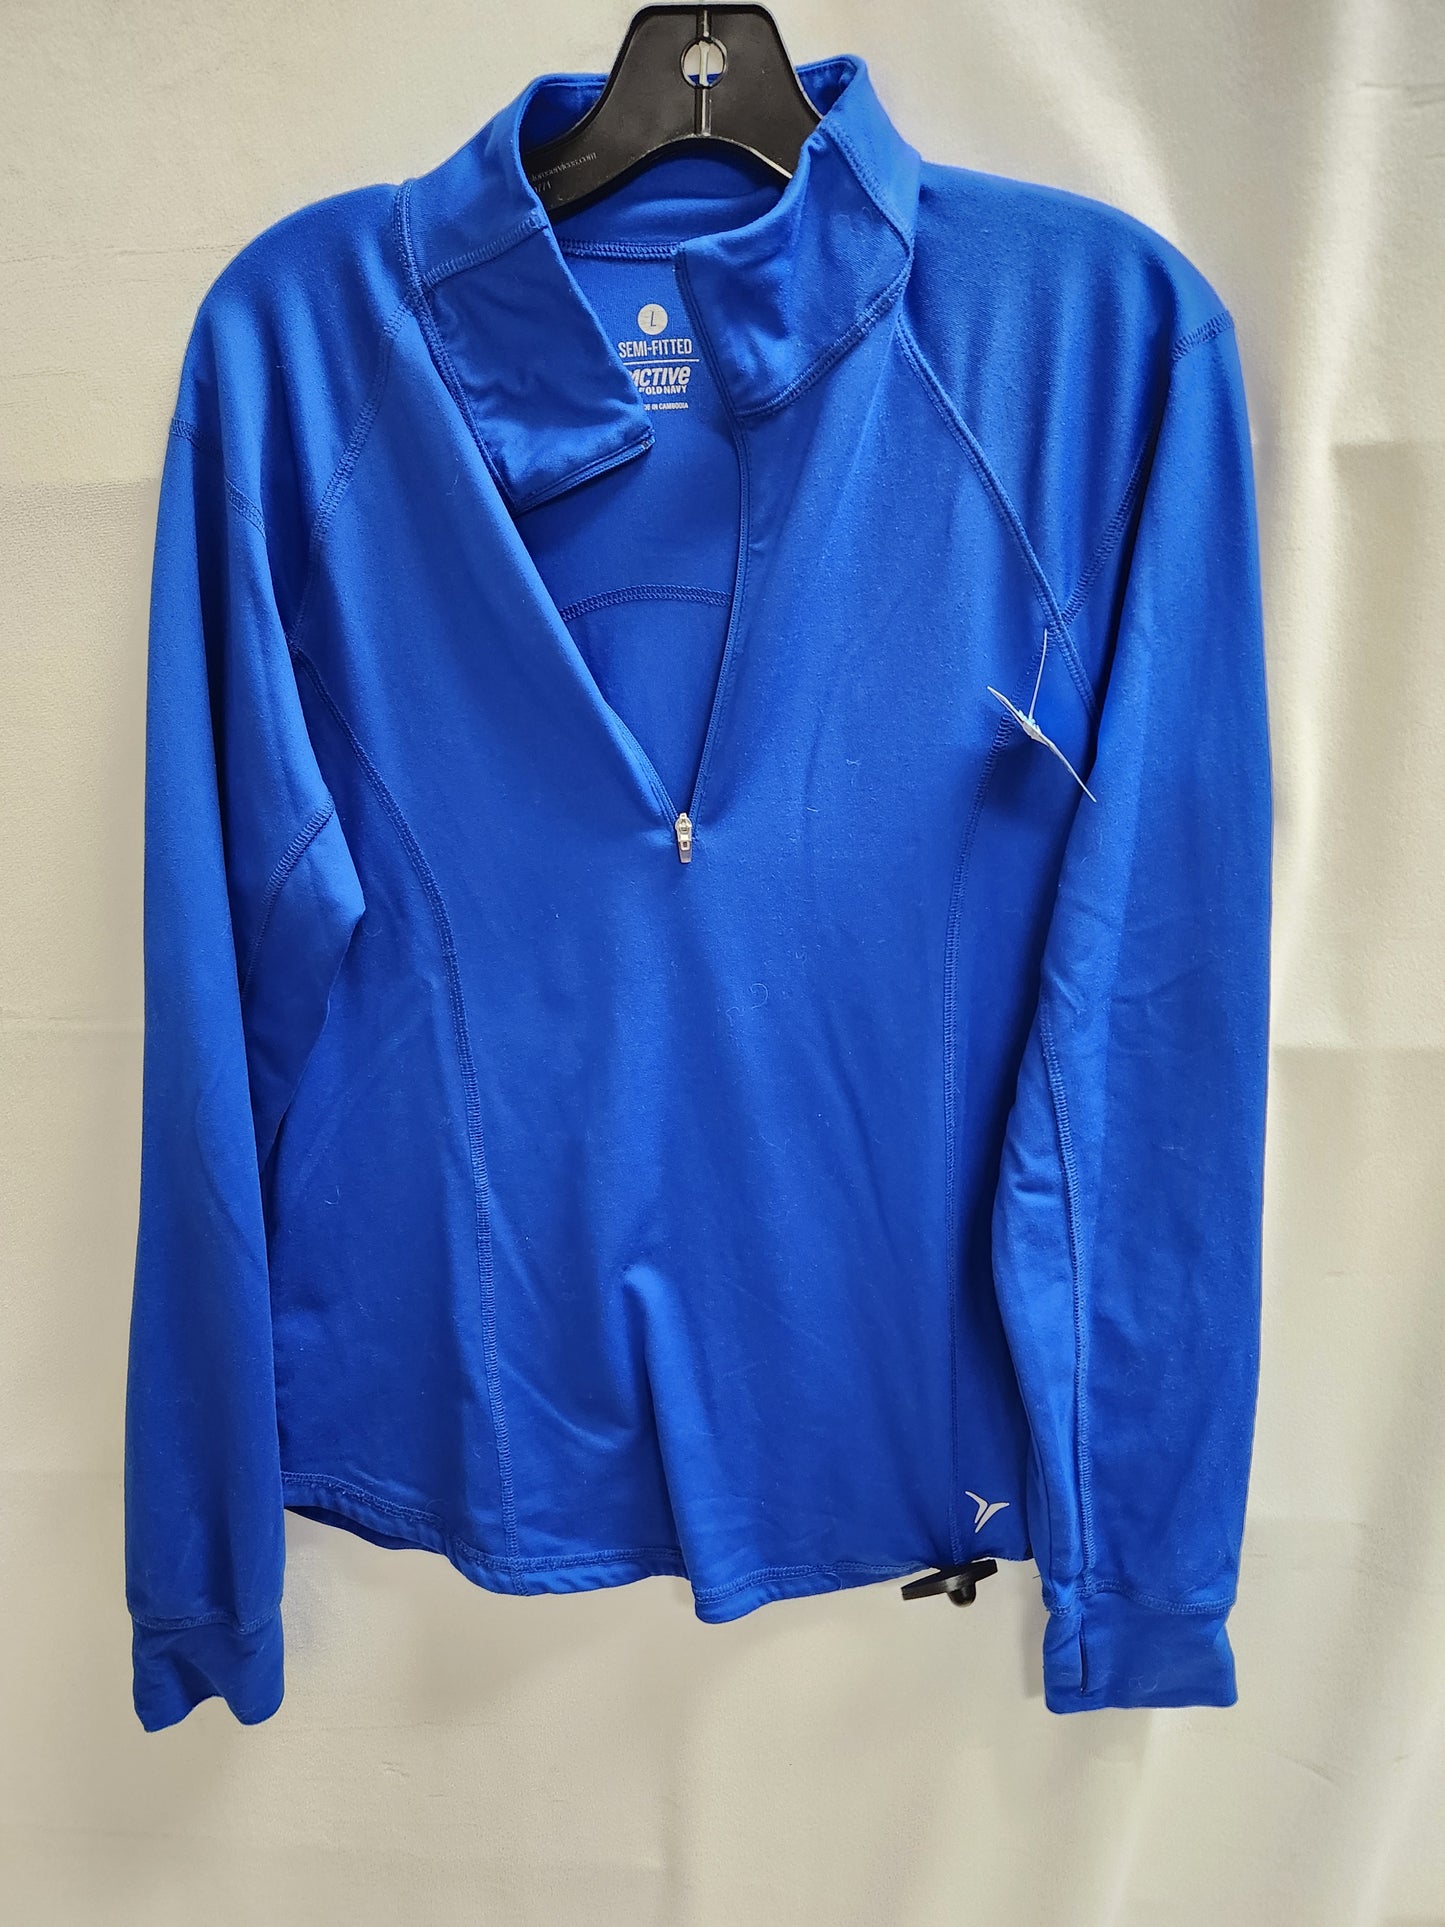 Athletic Top Long Sleeve Collar By Old Navy  Size: L